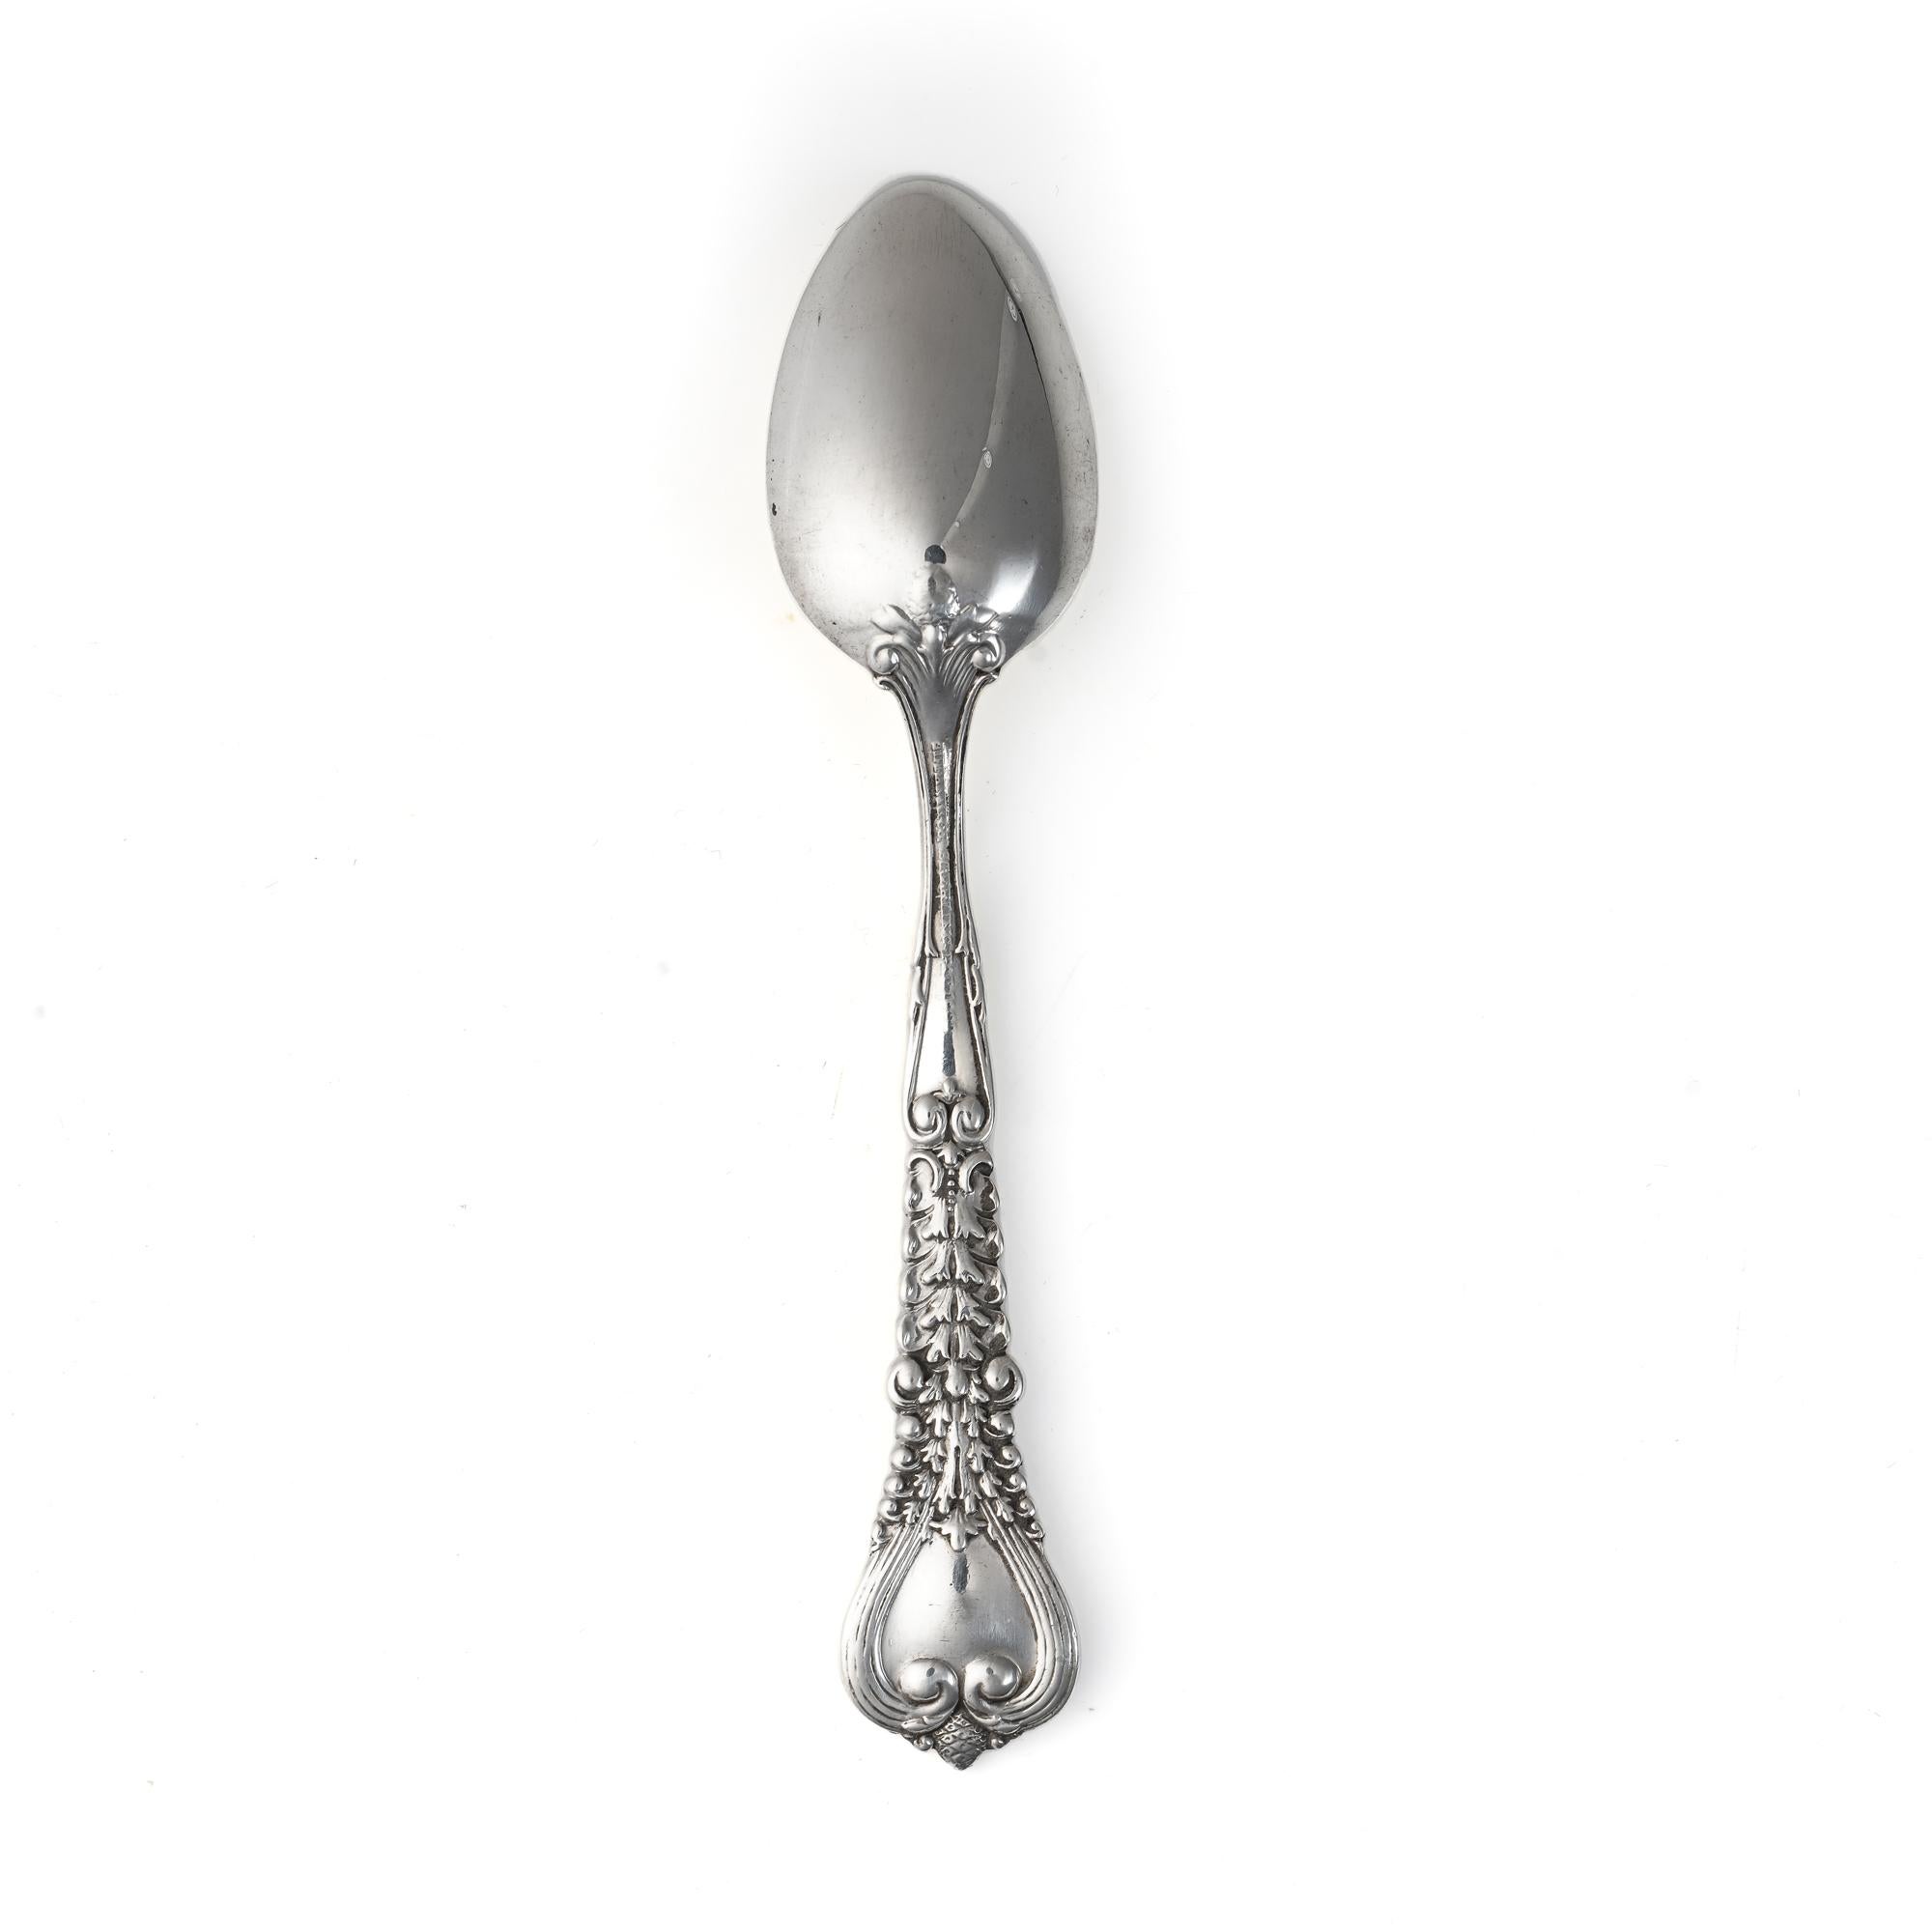 Antique Tiffany & Co. Sterling Silver Florentine Pattern Demitasse Spoon In Good Condition For Sale In Braintree, GB